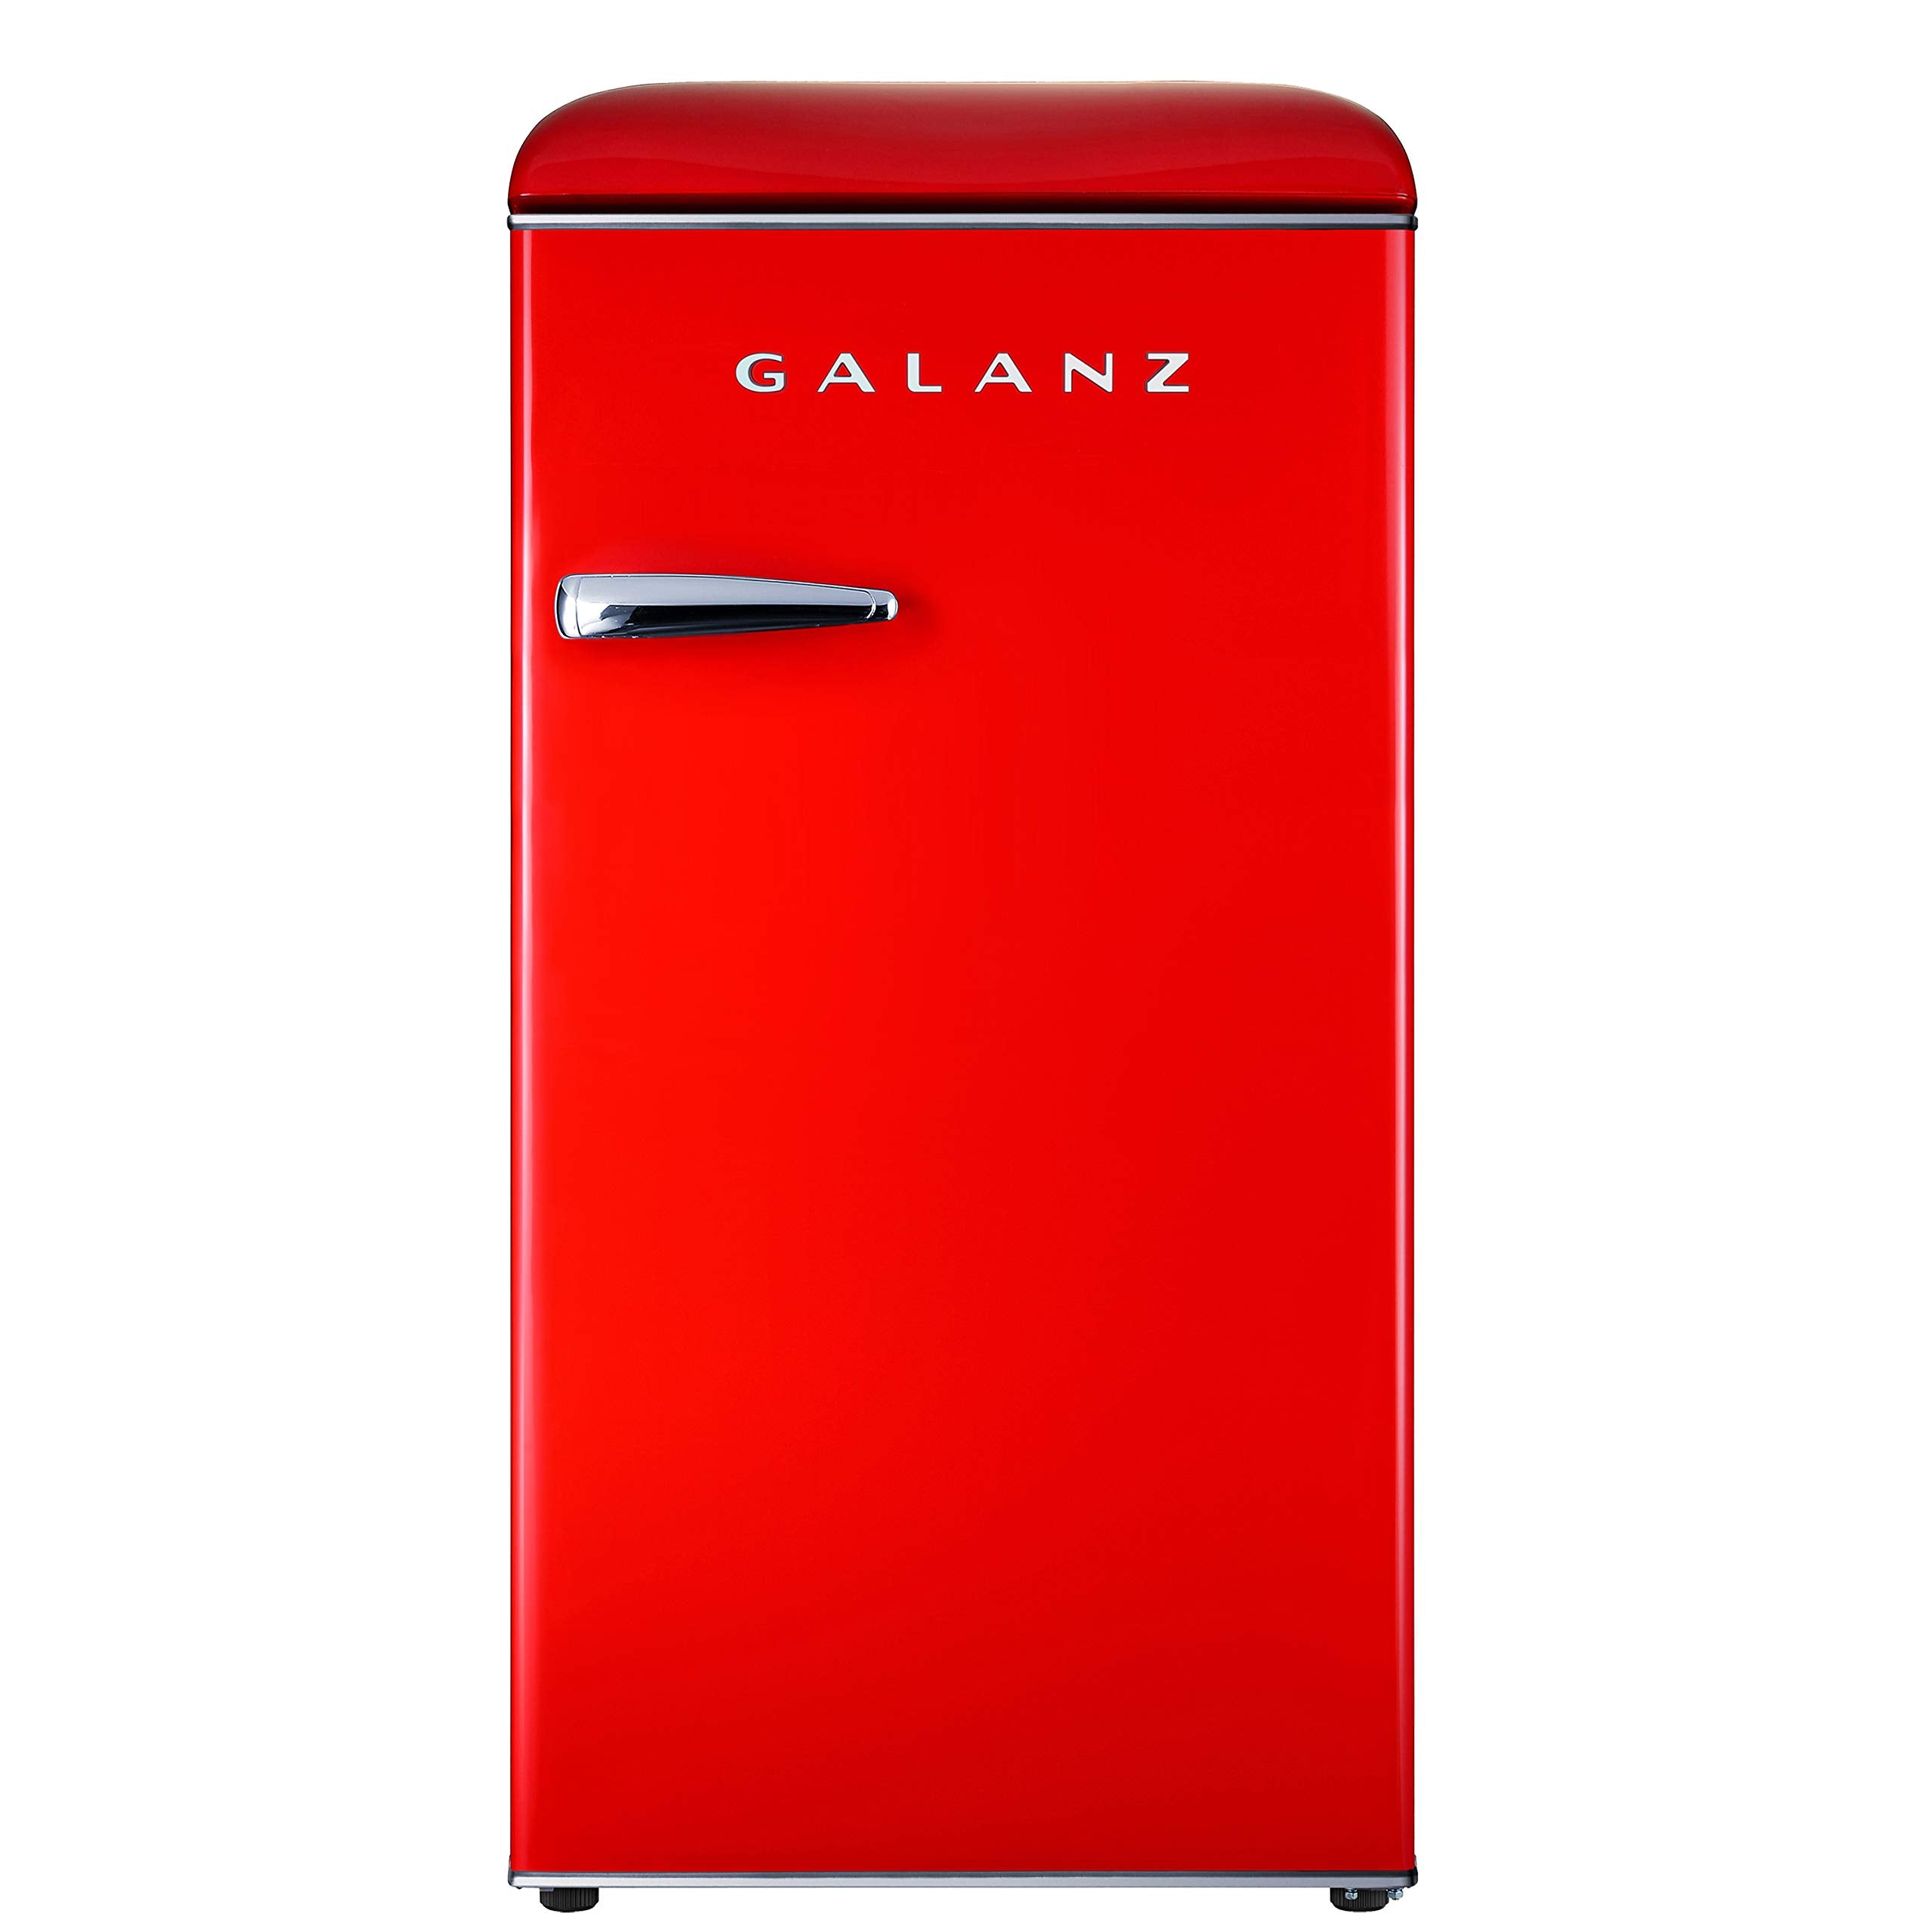 Galanz 3.3 Cu Ft Retro Compact Refrigerator with Adjustable Mechanical Thermostat